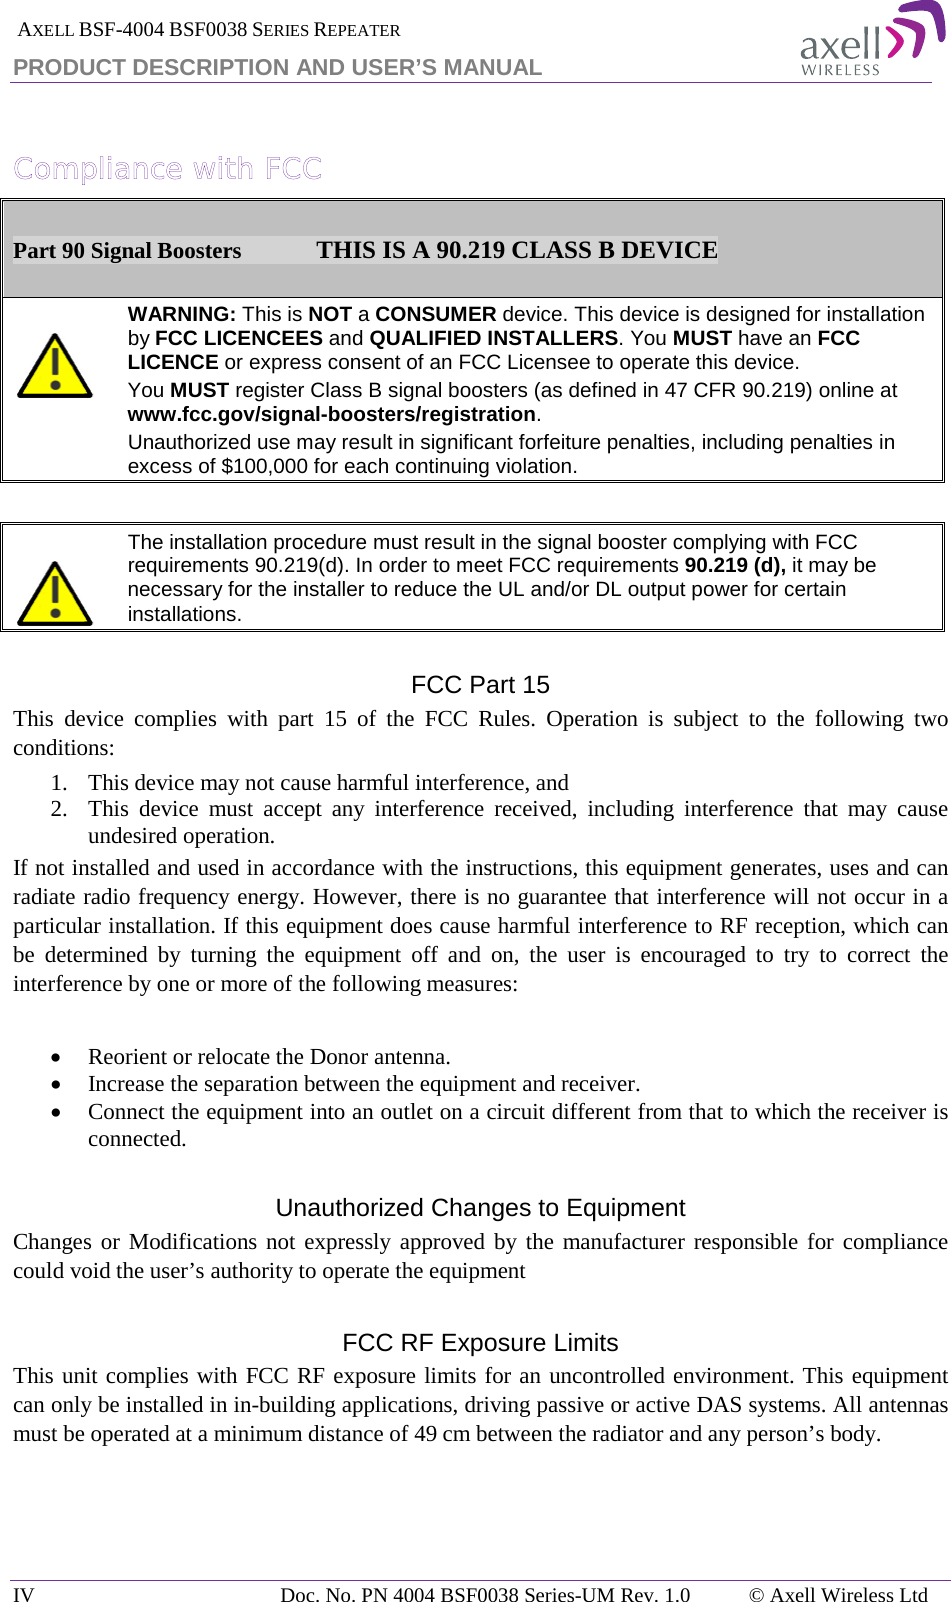  AXELL BSF-4004 BSF0038 SERIES REPEATER PRODUCT DESCRIPTION AND USER’S MANUAL  Compliance with FCC  Part 90 Signal Boosters             THIS IS A 90.219 CLASS B DEVICE    WARNING: This is NOT a CONSUMER device. This device is designed for installation by FCC LICENCEES and QUALIFIED INSTALLERS. You MUST have an FCC LICENCE or express consent of an FCC Licensee to operate this device.  You MUST register Class B signal boosters (as defined in 47 CFR 90.219) online at www.fcc.gov/signal-boosters/registration.  Unauthorized use may result in significant forfeiture penalties, including penalties in excess of $100,000 for each continuing violation.      The installation procedure must result in the signal booster complying with FCC requirements 90.219(d). In order to meet FCC requirements 90.219 (d), it may be necessary for the installer to reduce the UL and/or DL output power for certain installations.    FCC Part 15 This device complies with part 15 of the FCC Rules. Operation is subject to the following two conditions:  1. This device may not cause harmful interference, and   2. This device must accept any interference received, including interference that may cause undesired operation.  If not installed and used in accordance with the instructions, this equipment generates, uses and can radiate radio frequency energy. However, there is no guarantee that interference will not occur in a particular installation. If this equipment does cause harmful interference to RF reception, which can be determined by turning the equipment off and on, the user is encouraged to try to correct the interference by one or more of the following measures:  • Reorient or relocate the Donor antenna. • Increase the separation between the equipment and receiver. • Connect the equipment into an outlet on a circuit different from that to which the receiver is connected.  Unauthorized Changes to Equipment Changes or Modifications not expressly approved by the manufacturer responsible for compliance could void the user’s authority to operate the equipment  FCC RF Exposure Limits This unit complies with FCC RF exposure limits for an uncontrolled environment. This equipment can only be installed in in-building applications, driving passive or active DAS systems. All antennas must be operated at a minimum distance of 49 cm between the radiator and any person’s body.    IV Doc. No. PN 4004 BSF0038 Series-UM Rev. 1.0 © Axell Wireless Ltd 